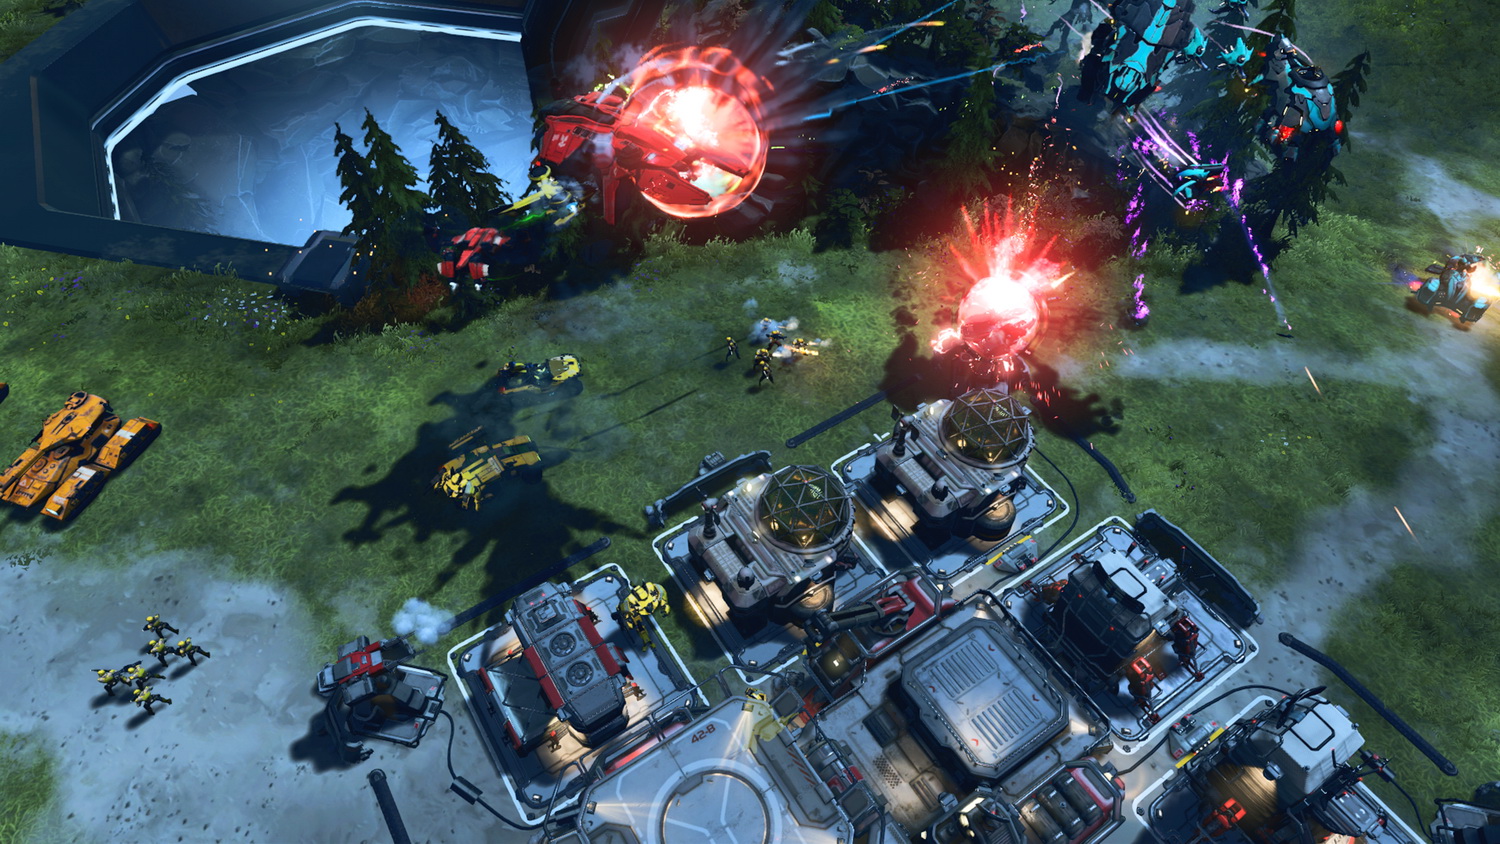 Halo Wars 2 review